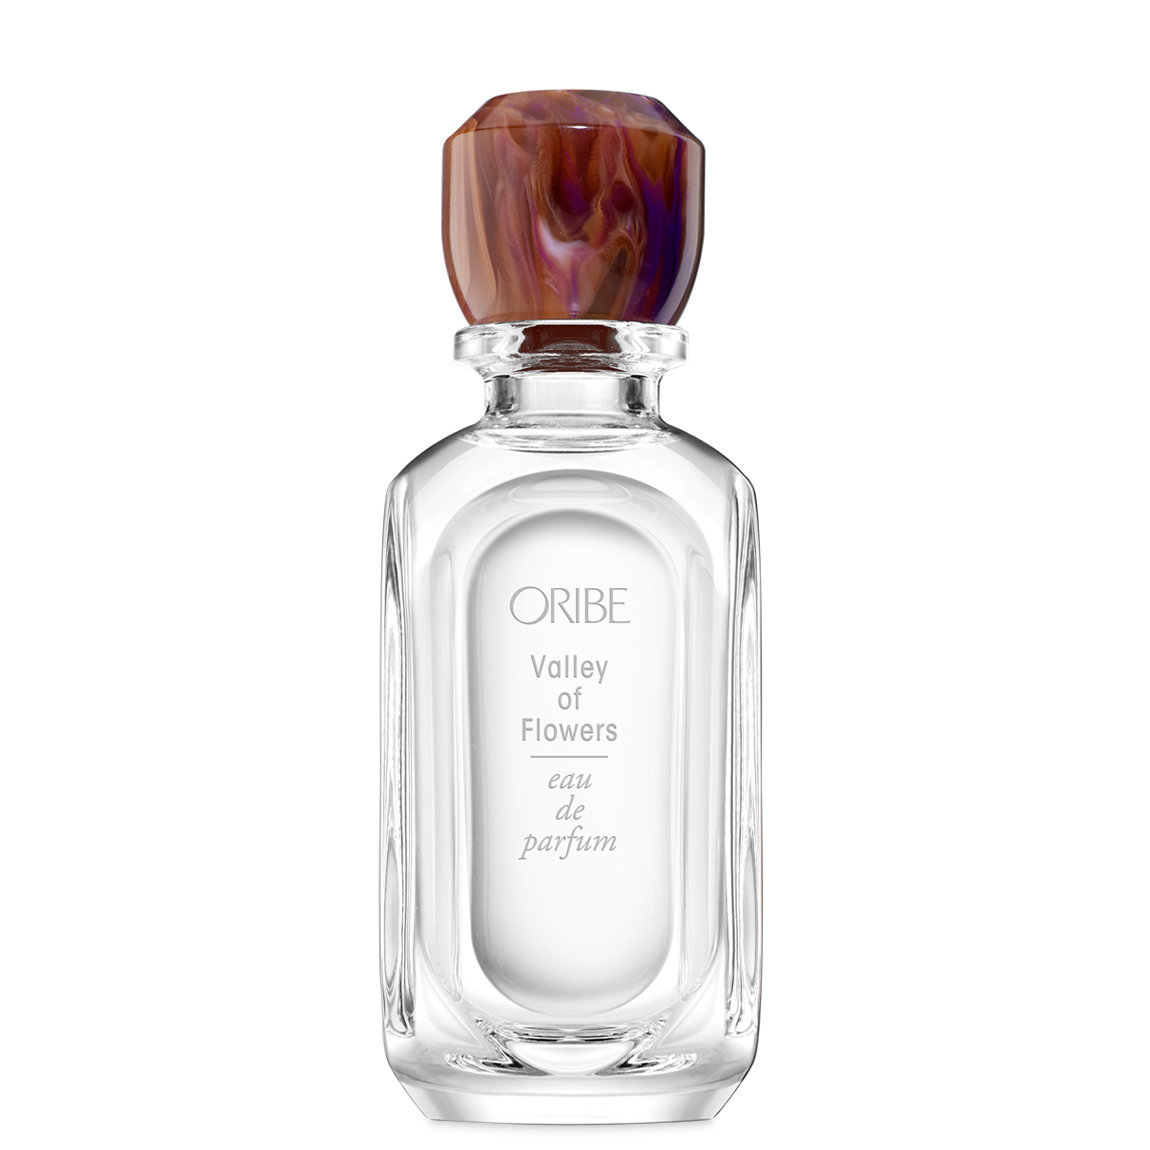 Oribe Valley of Flowers 75 ml alternative view 1 - product swatch.